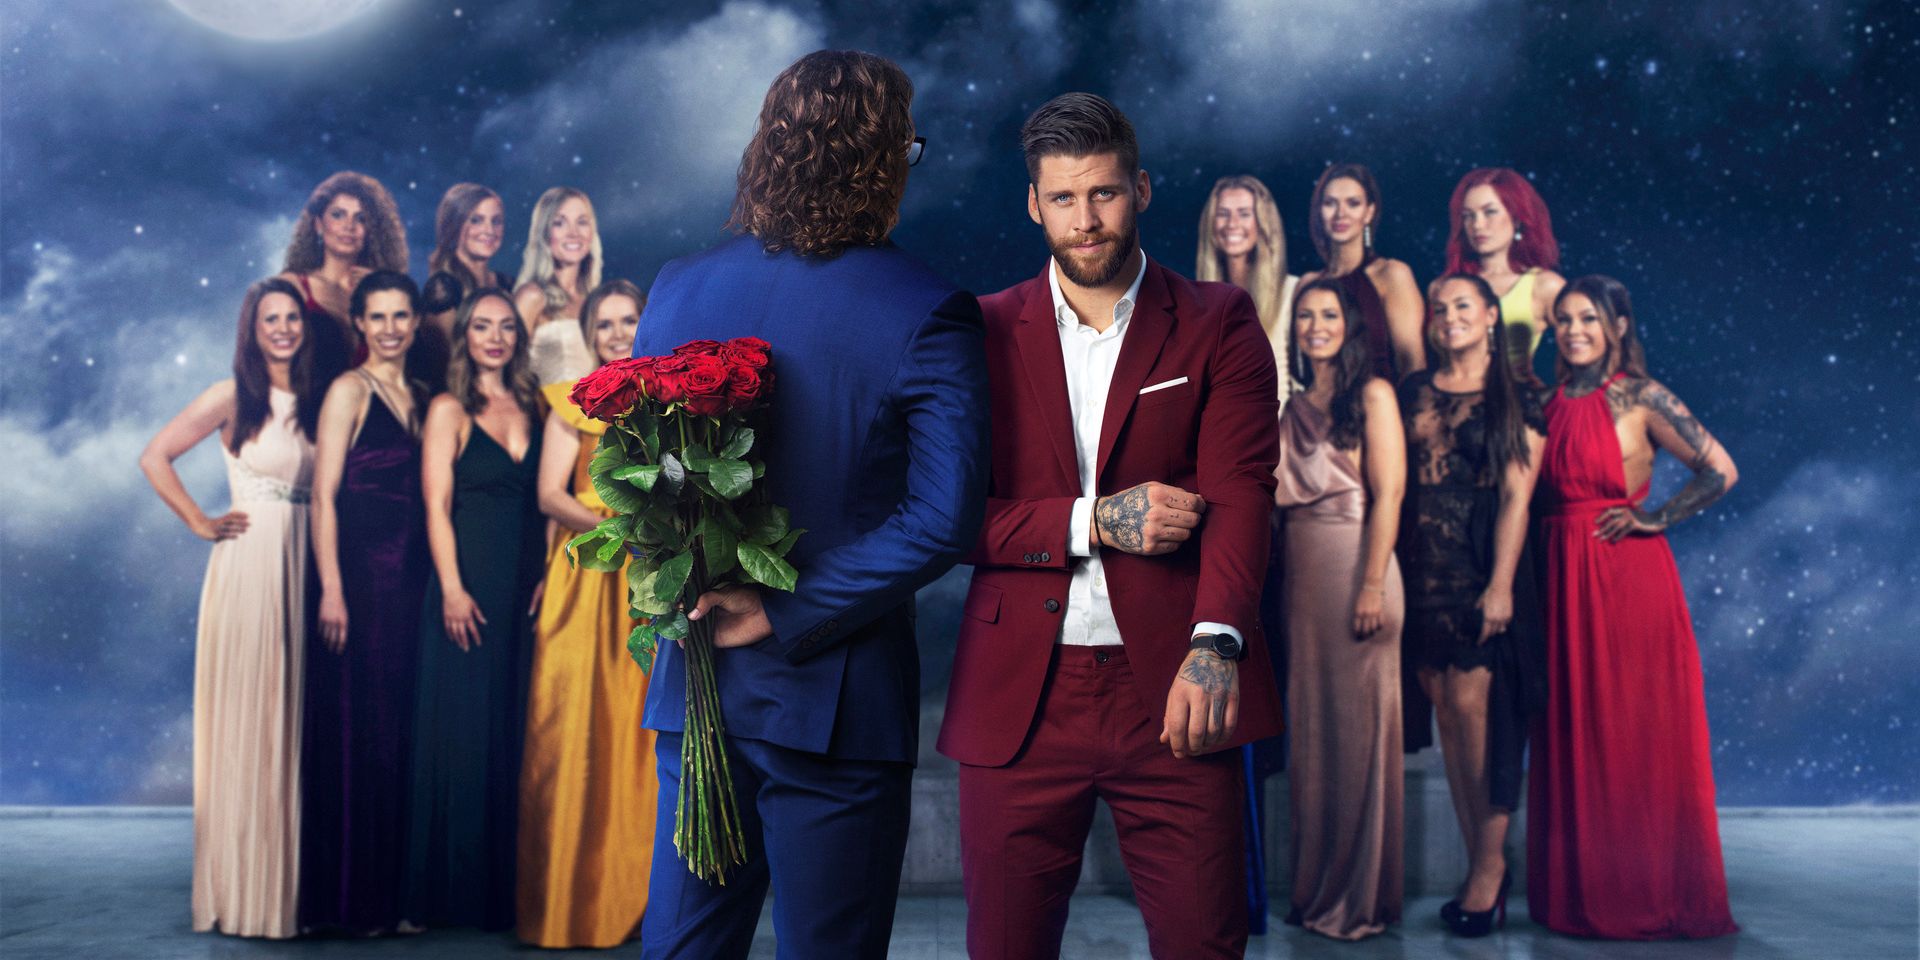 All contestants and two bachelors pose in The Bachelor.